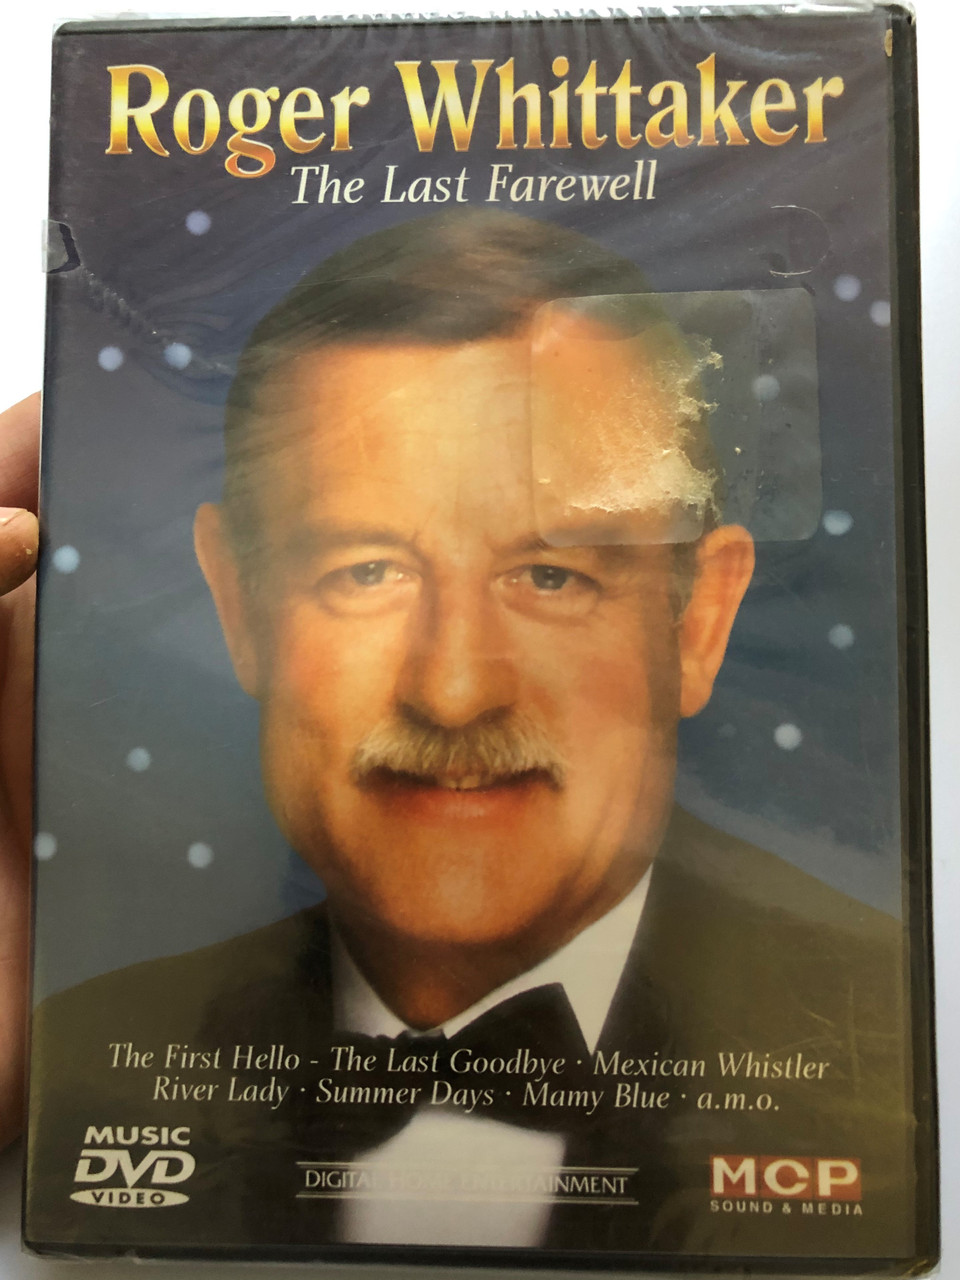 Roger Whittaker - The Last Farewell DVD 2011 / The First Hello, Mexican  Whistler, River Lady, Summer Days / MCP Sound & Media - bibleinmylanguage